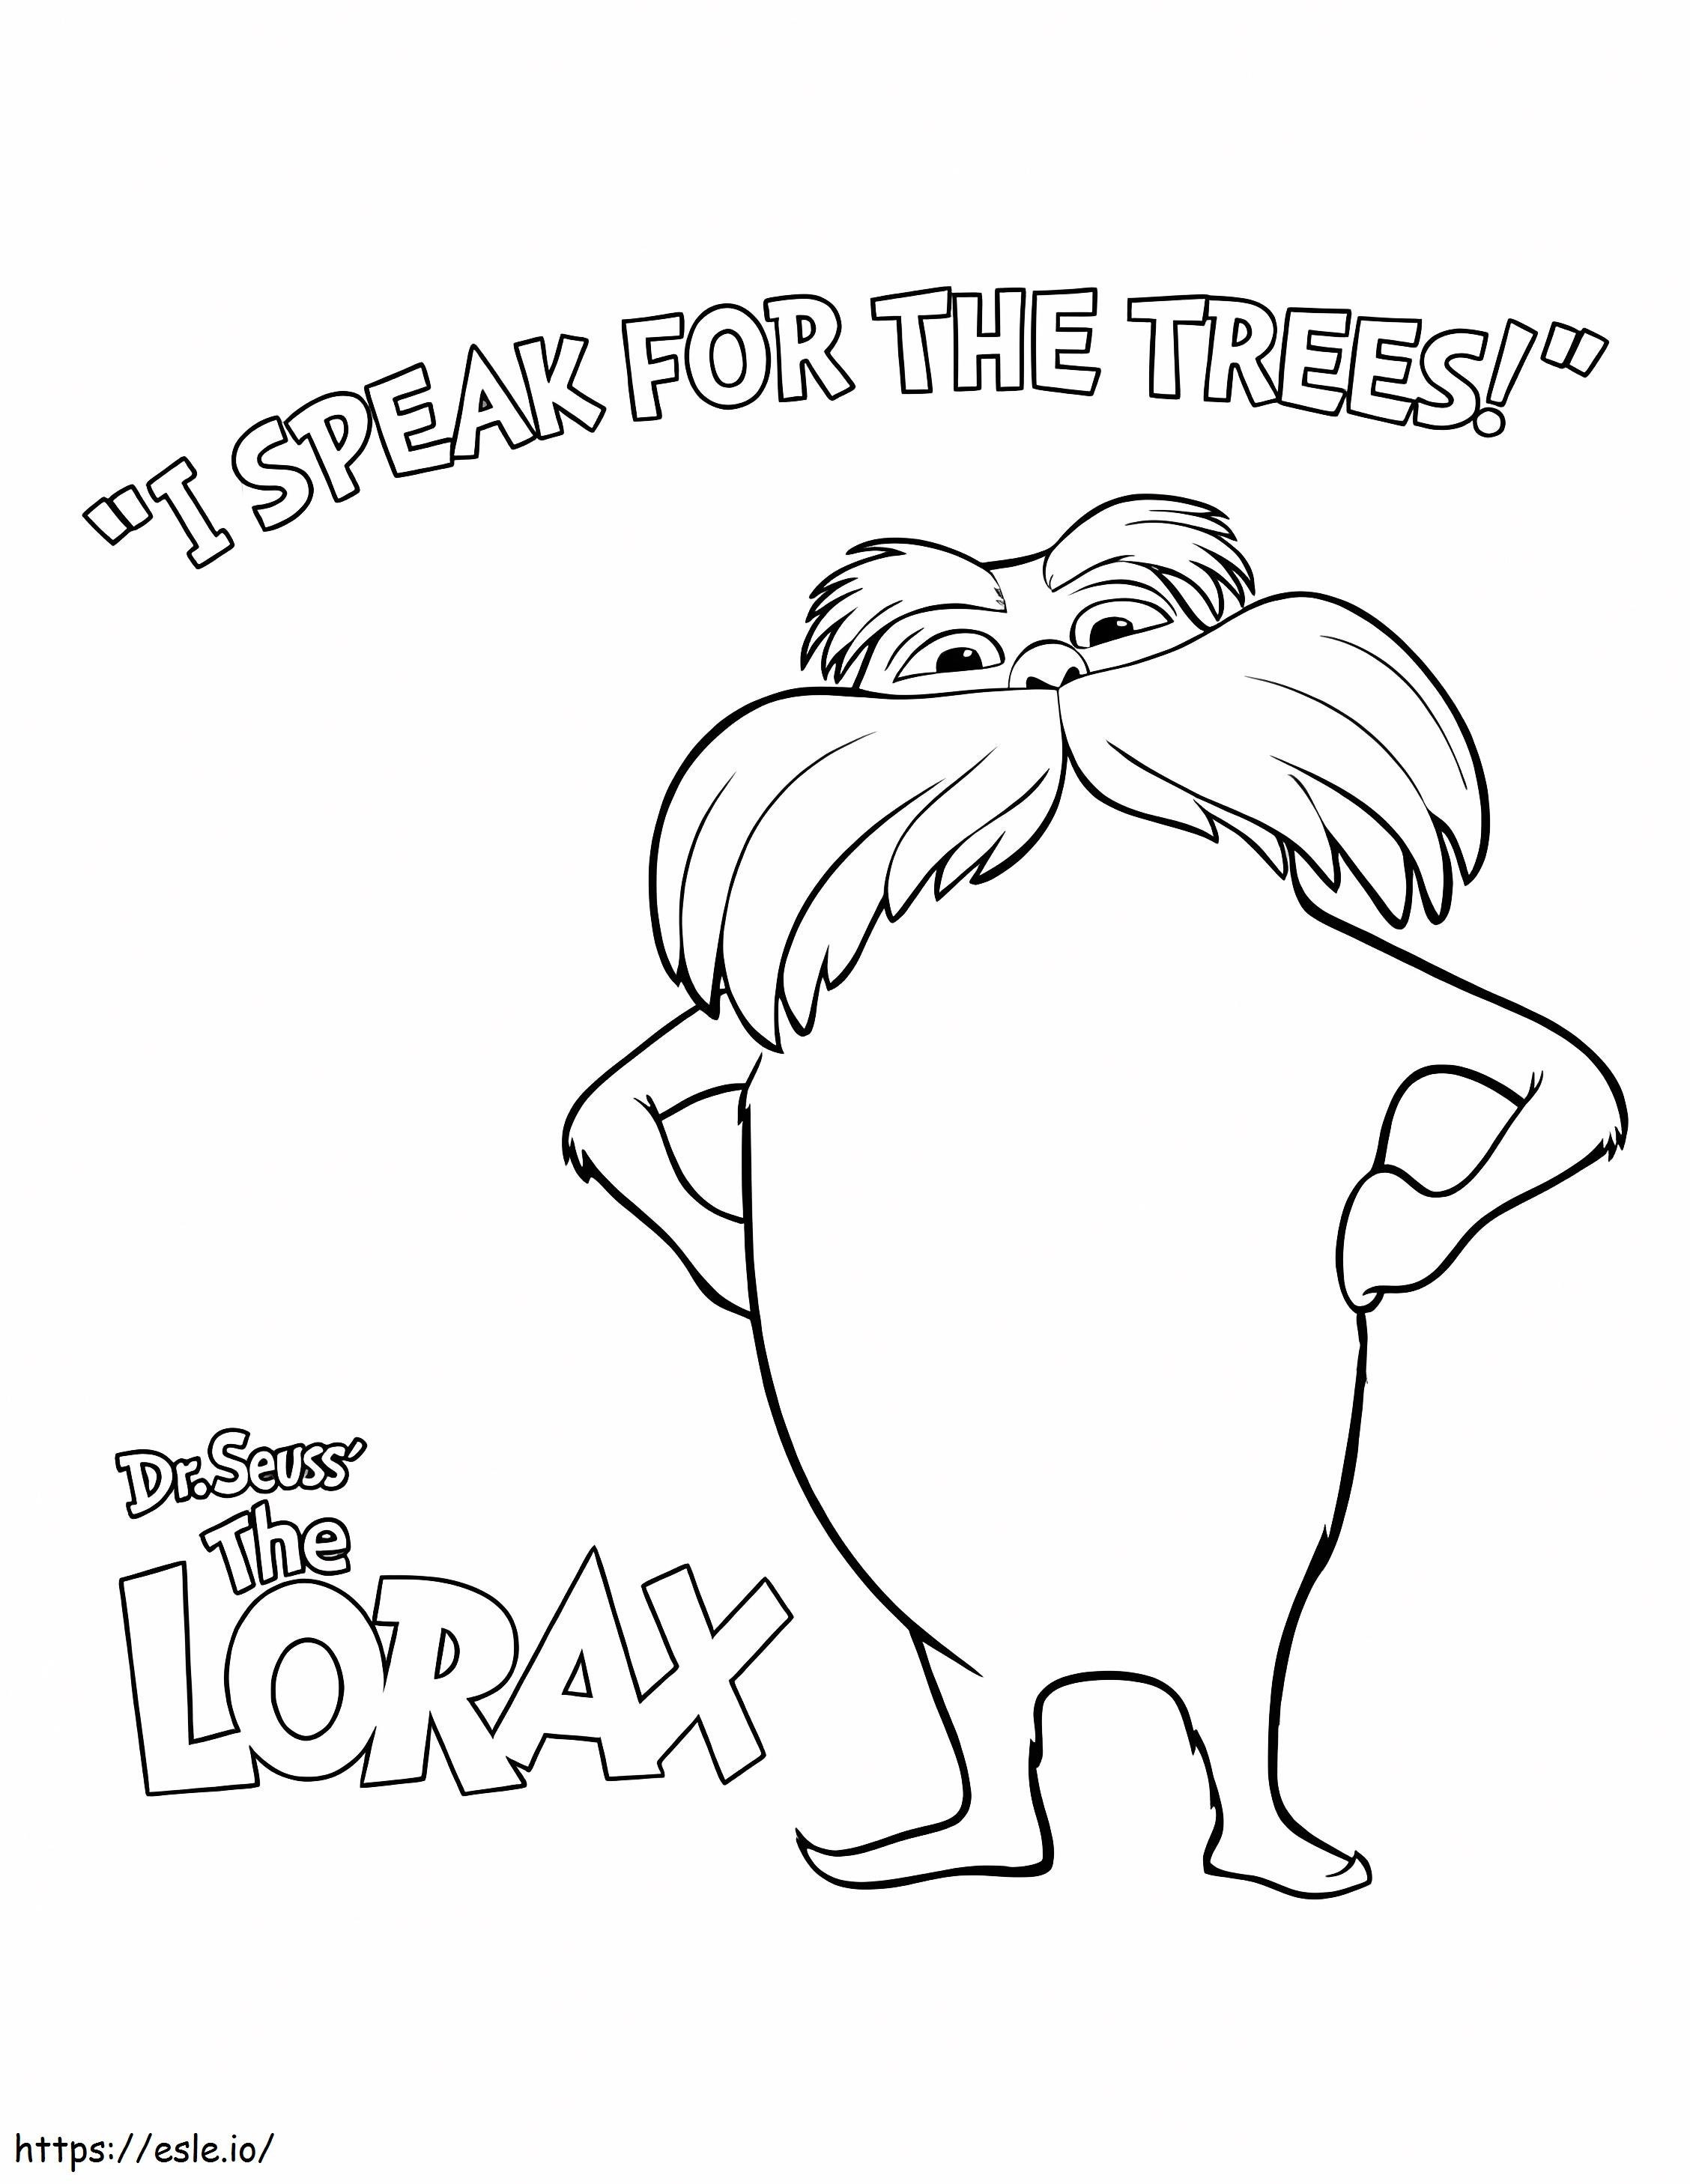 The Lorax 1 coloring page